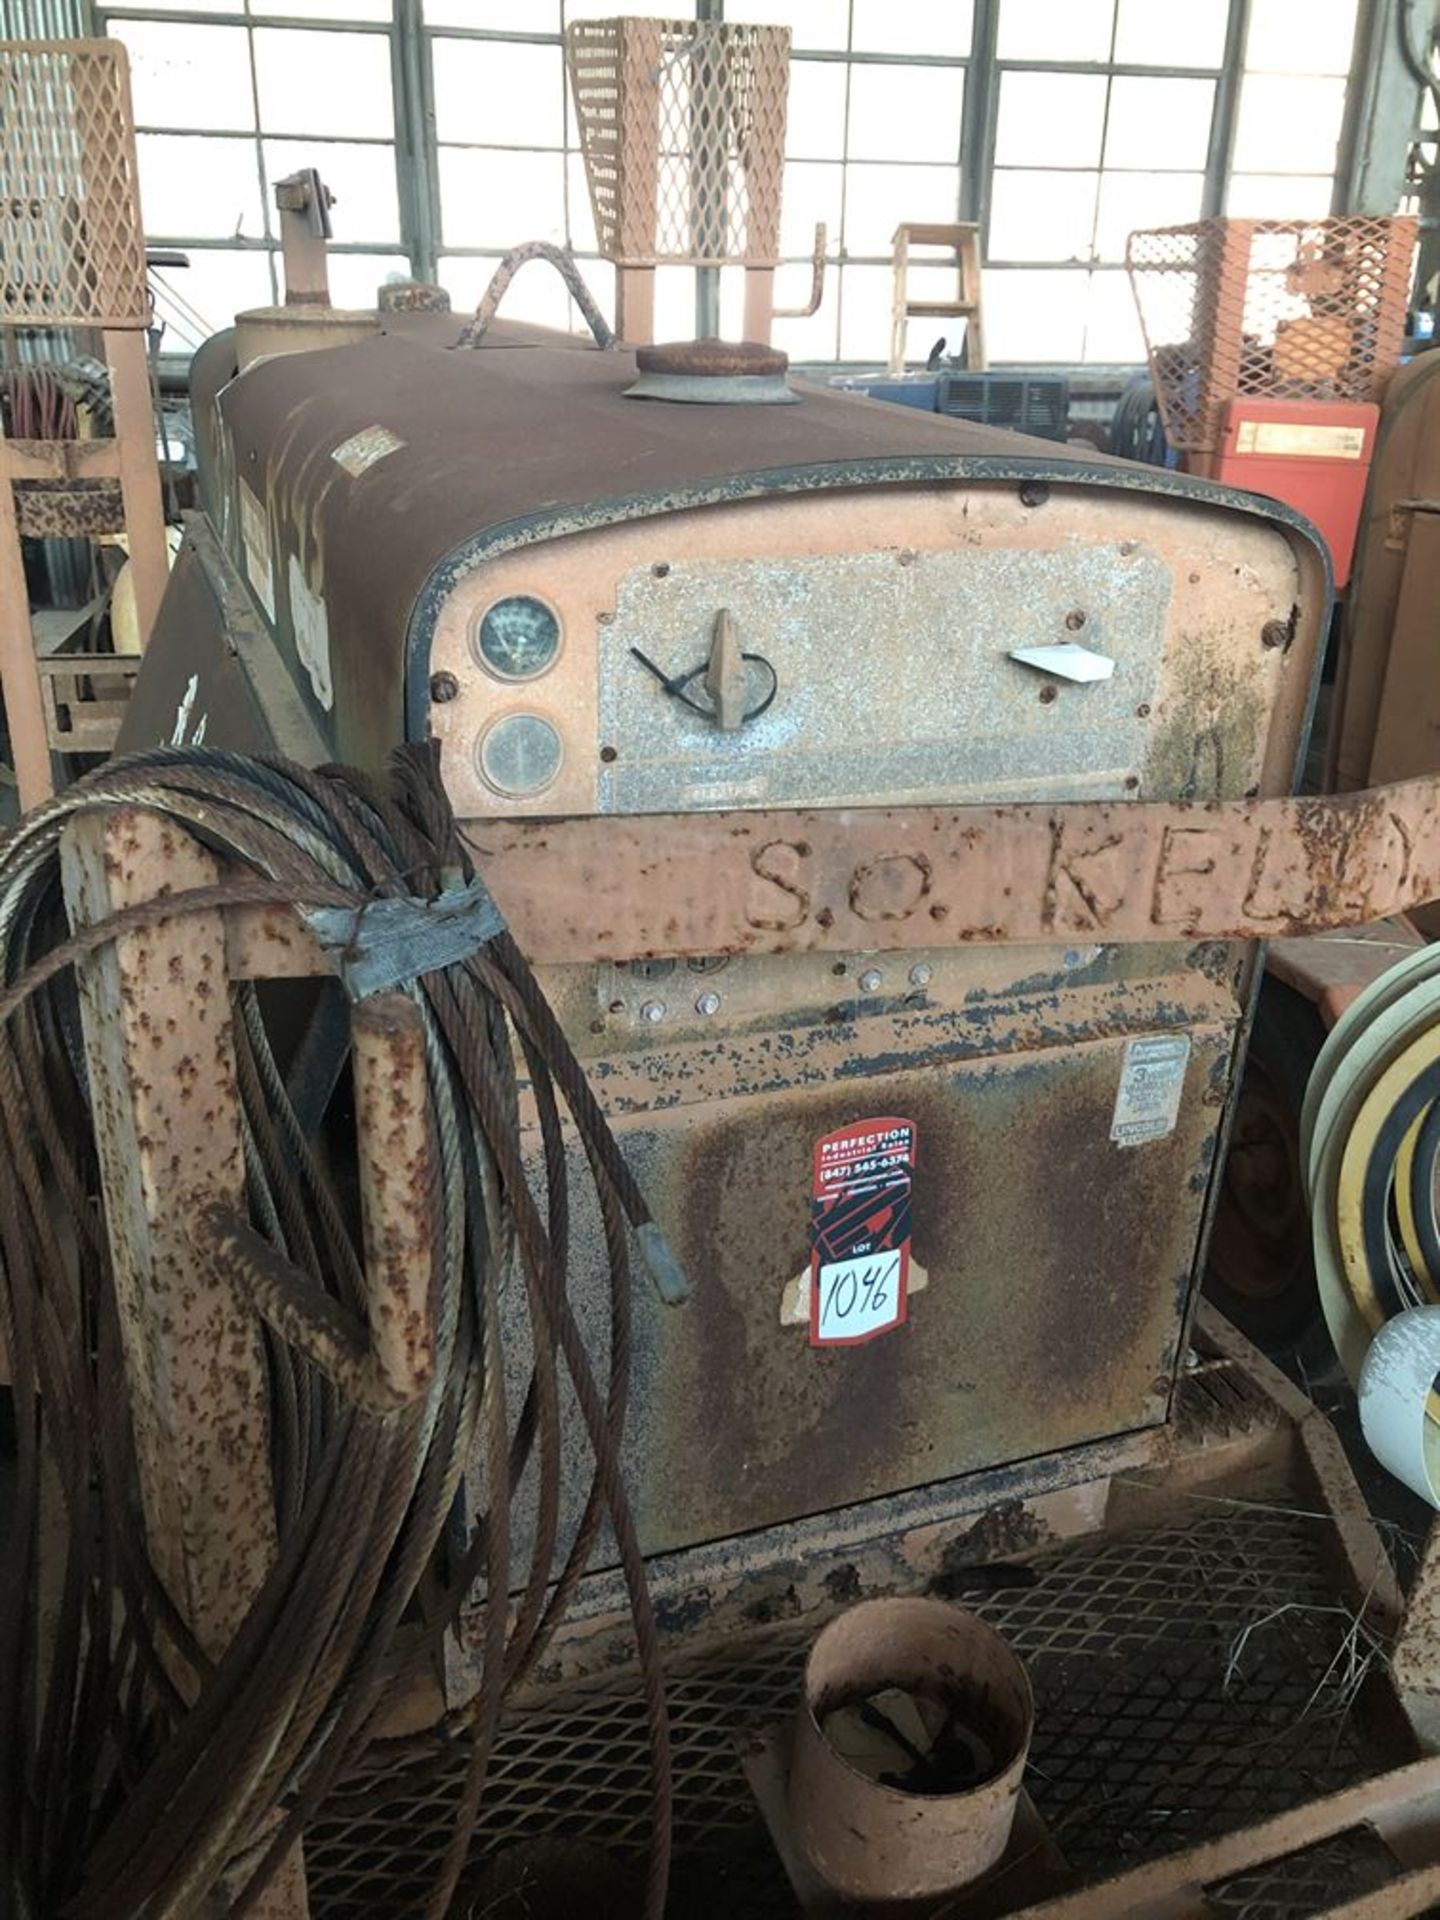 Lot Comprising of Unknown Make Trailer, Lincoln Welding Power Source Generator, No Title ( - Image 2 of 2